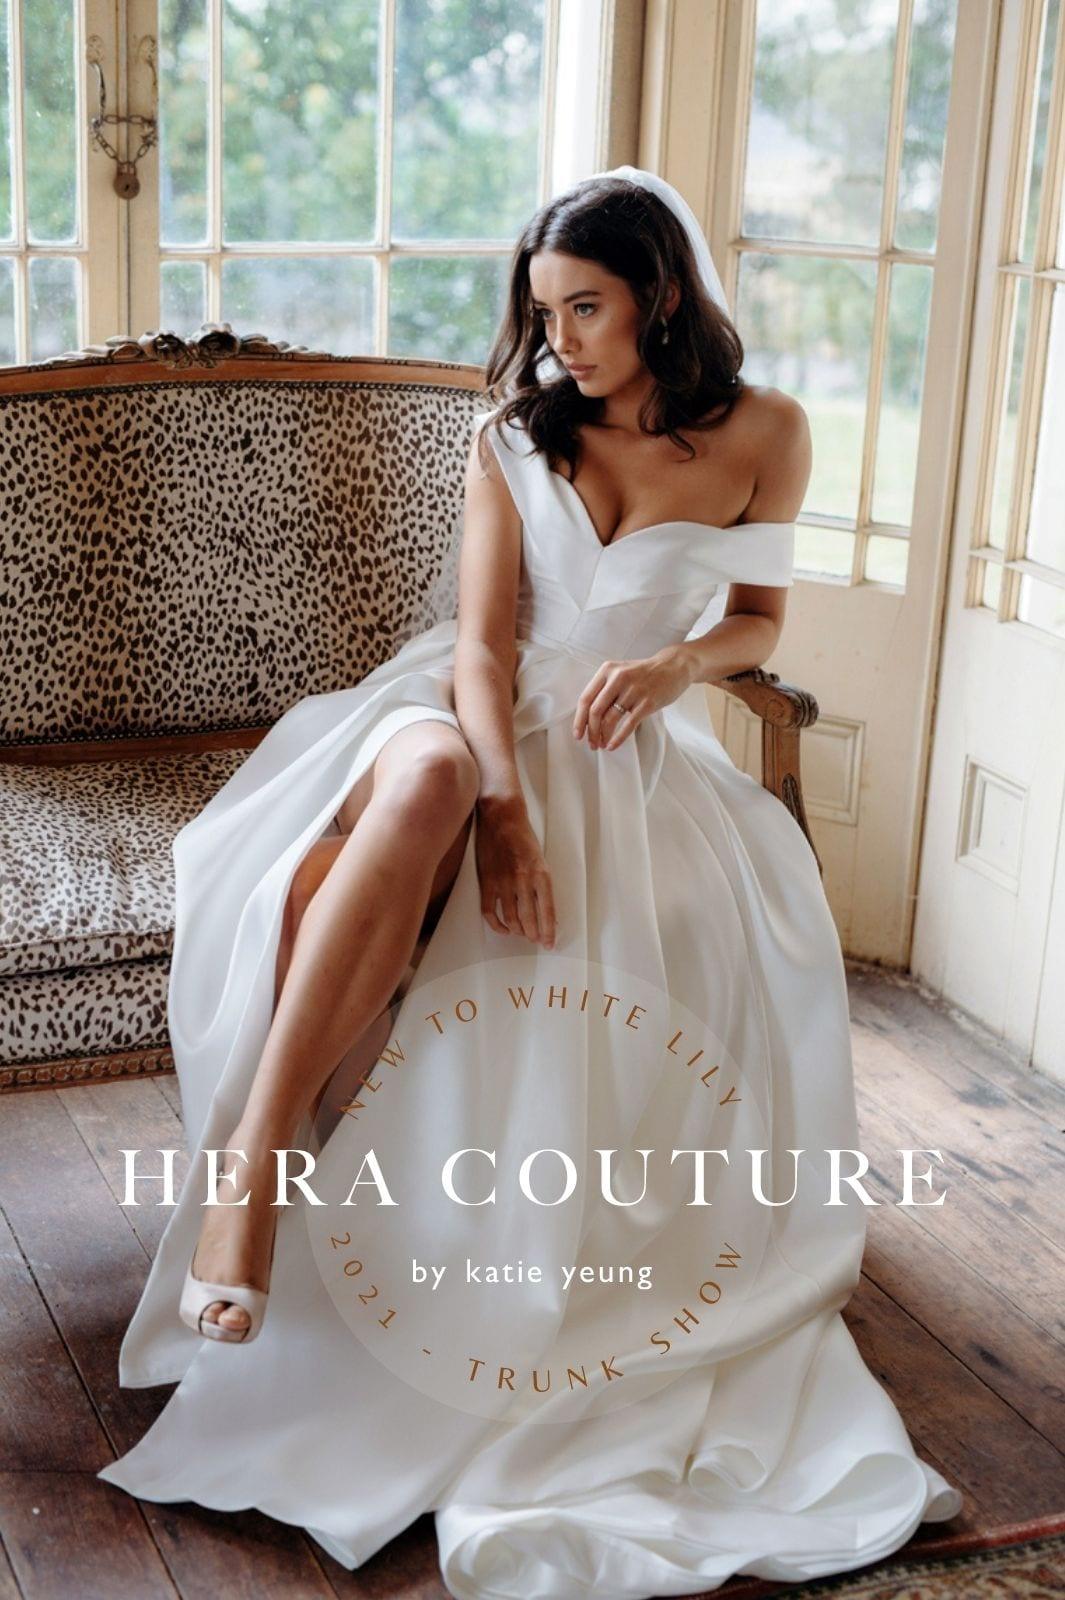 For a Limited Time - Hera Couture by Katie Yeung - White Lily Couture